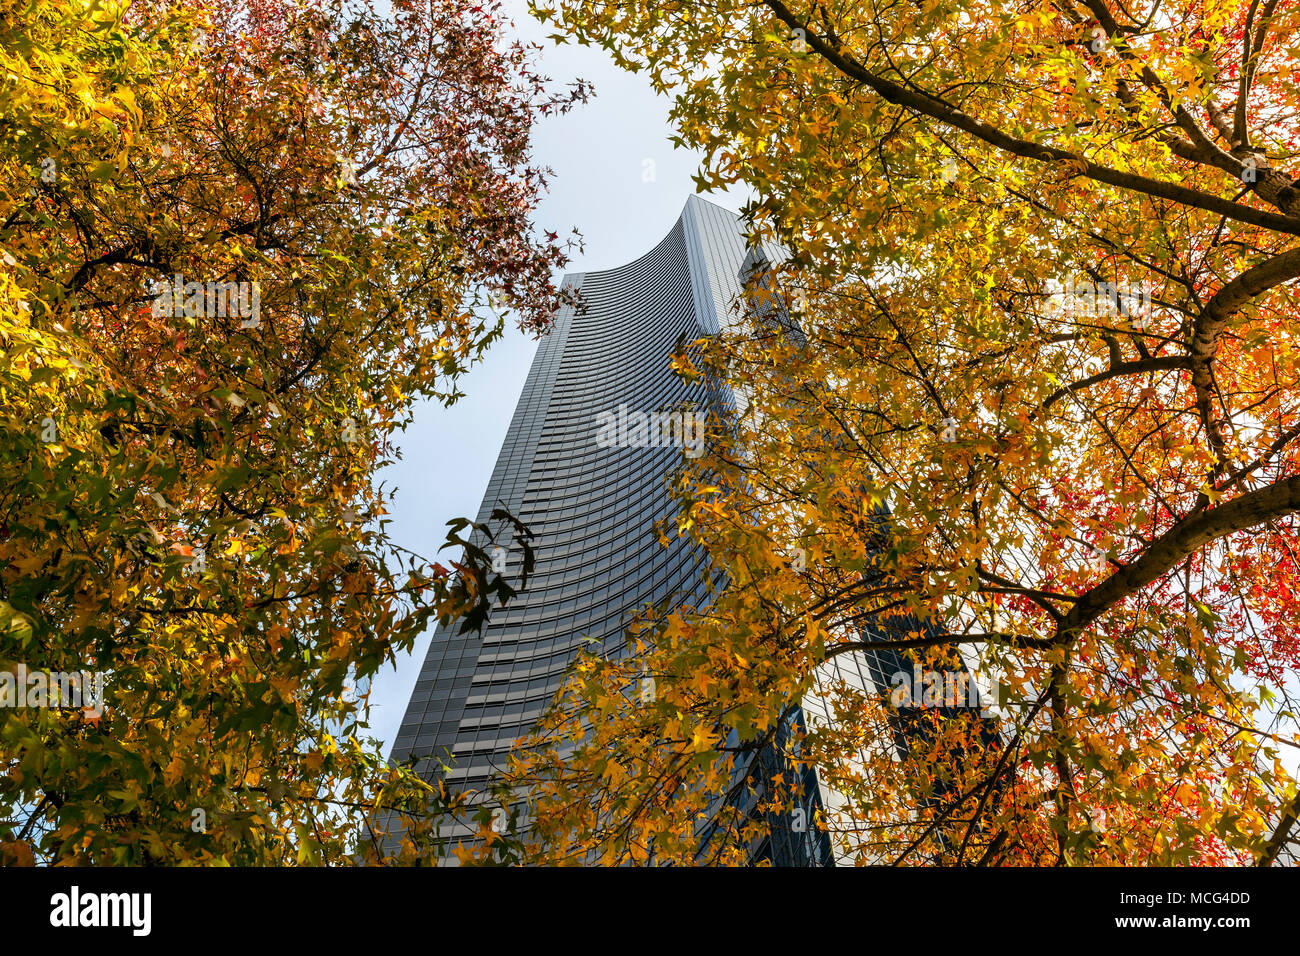 WA14311-00...WASHINGTON - The Columbis Center Building framed in fall color from trees along 4th Avenue. Stock Photo